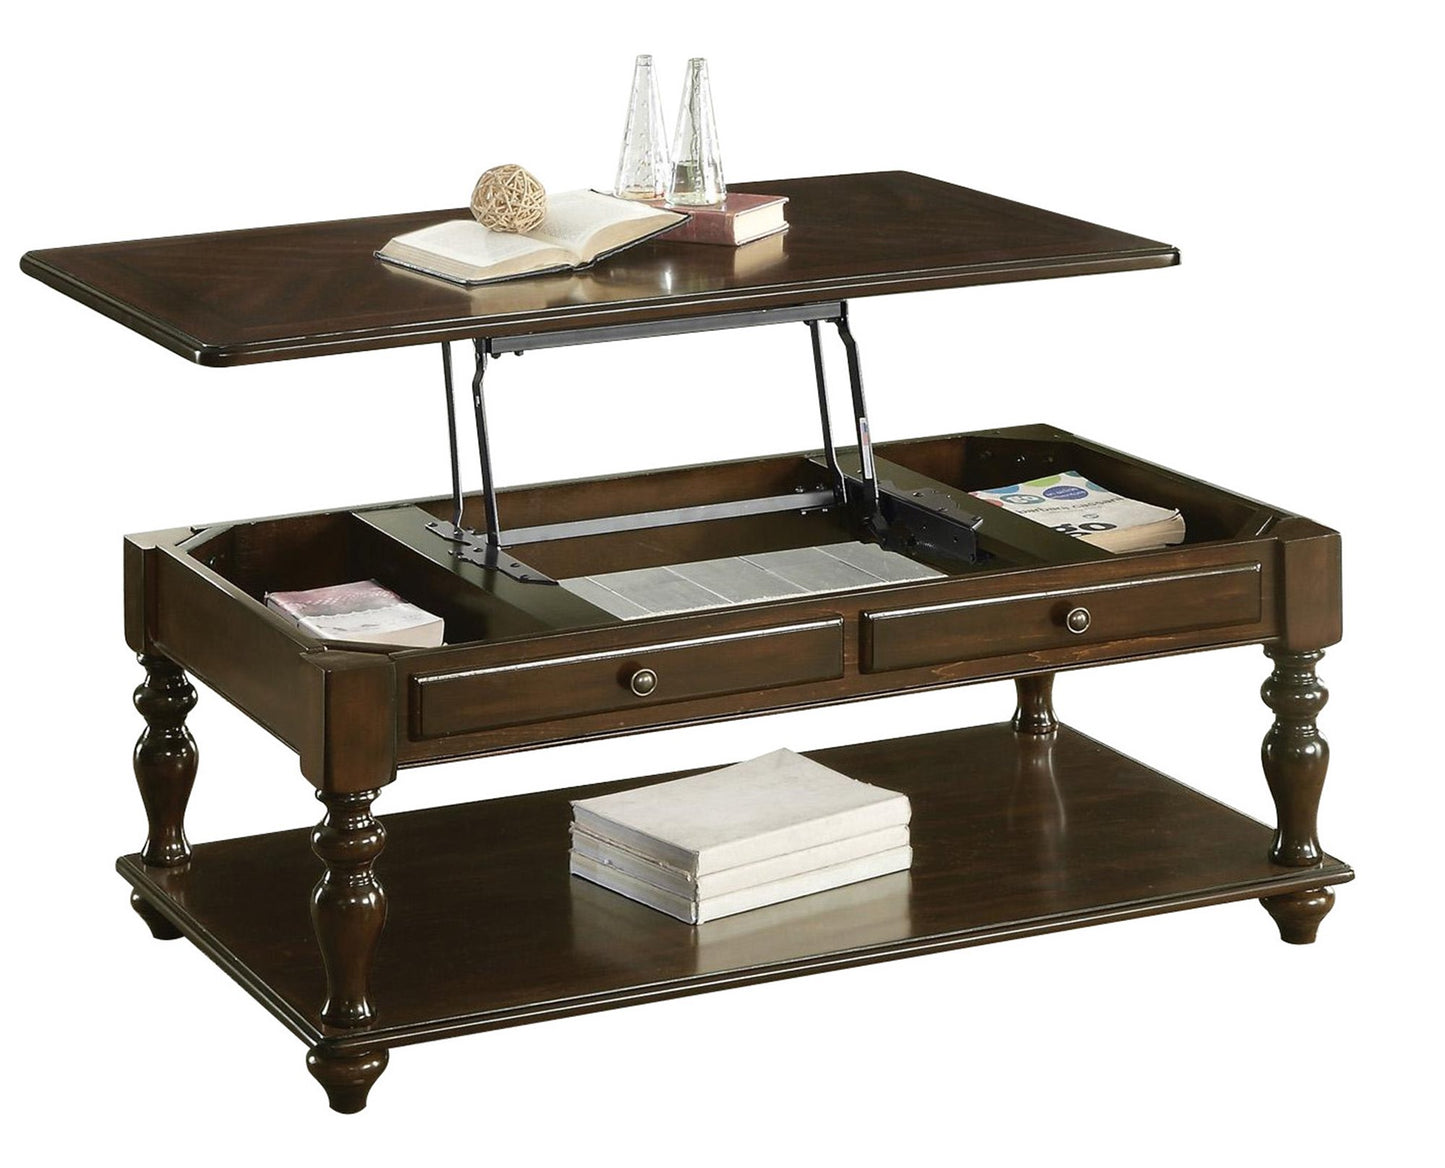 Homelegance Lovington 2PC Occasional Set Lift Top Cocktail Table on Casters, 1 End Table in Espresso